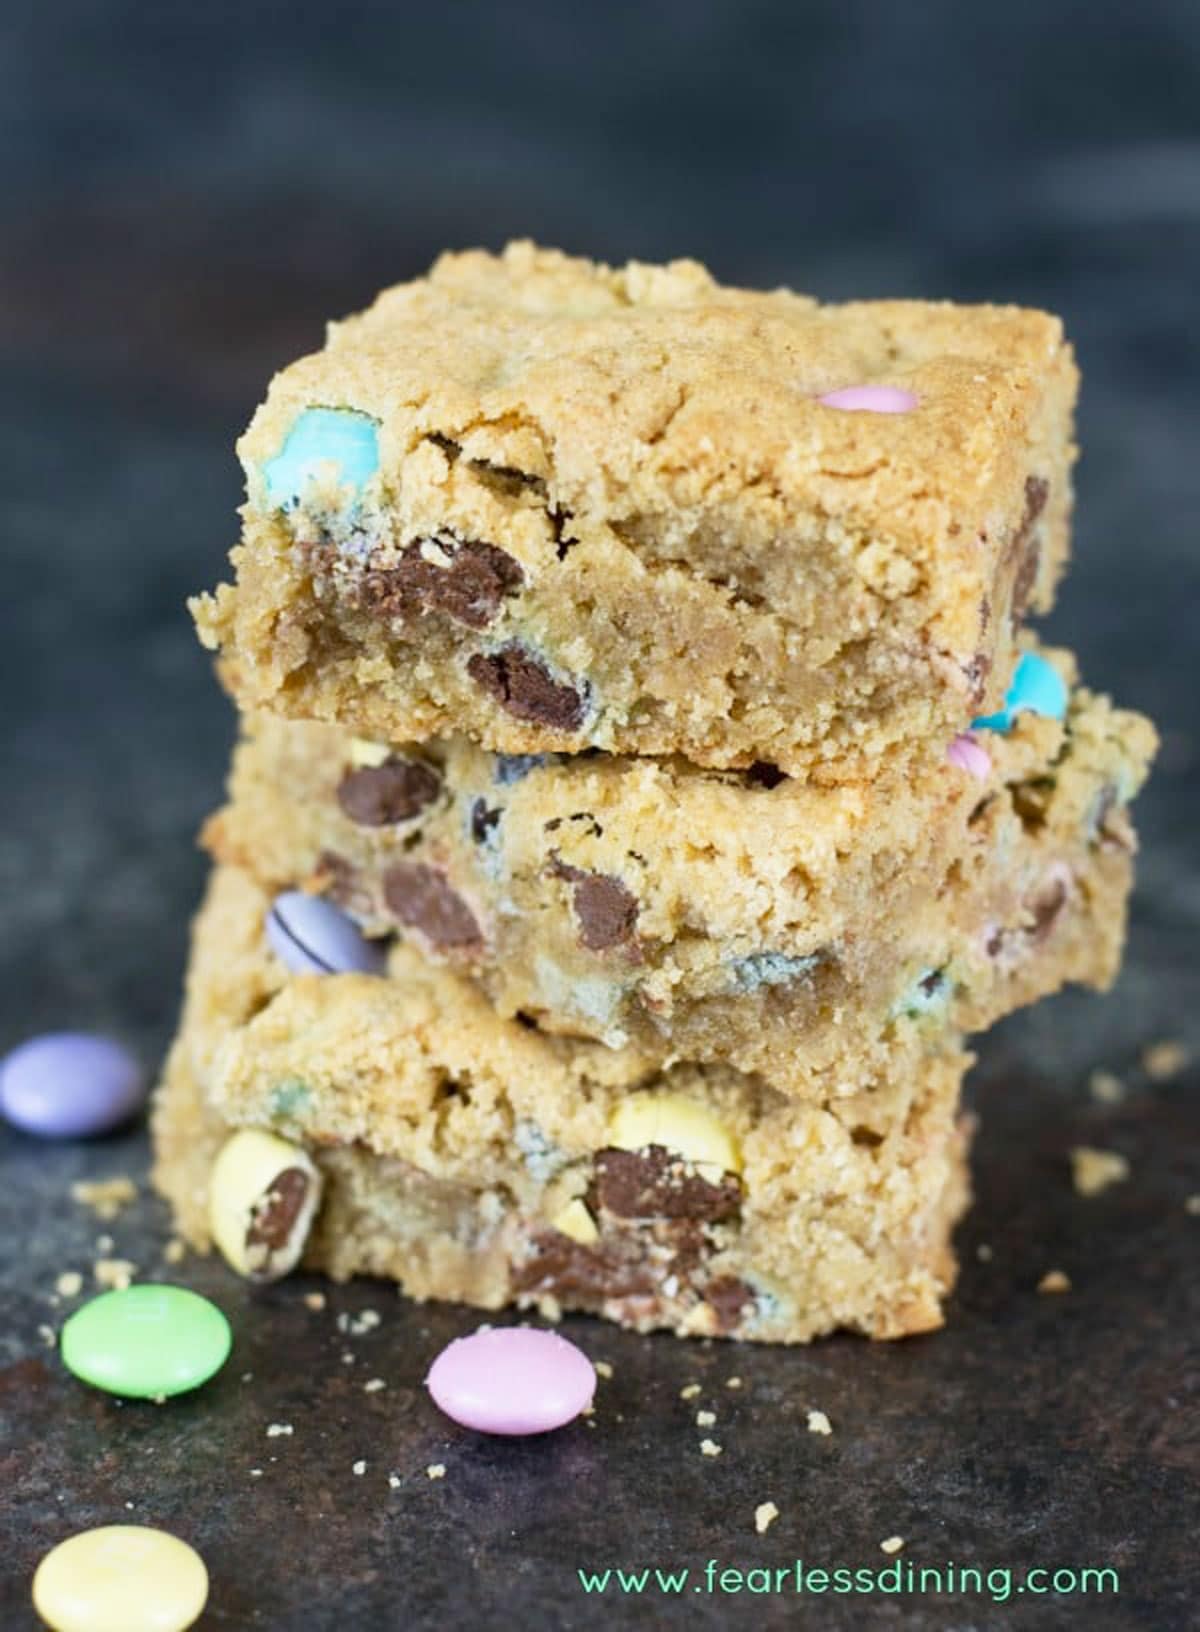 A stack of three peanut butter cookie bars. The bars have pastel M&Ms baked in them.